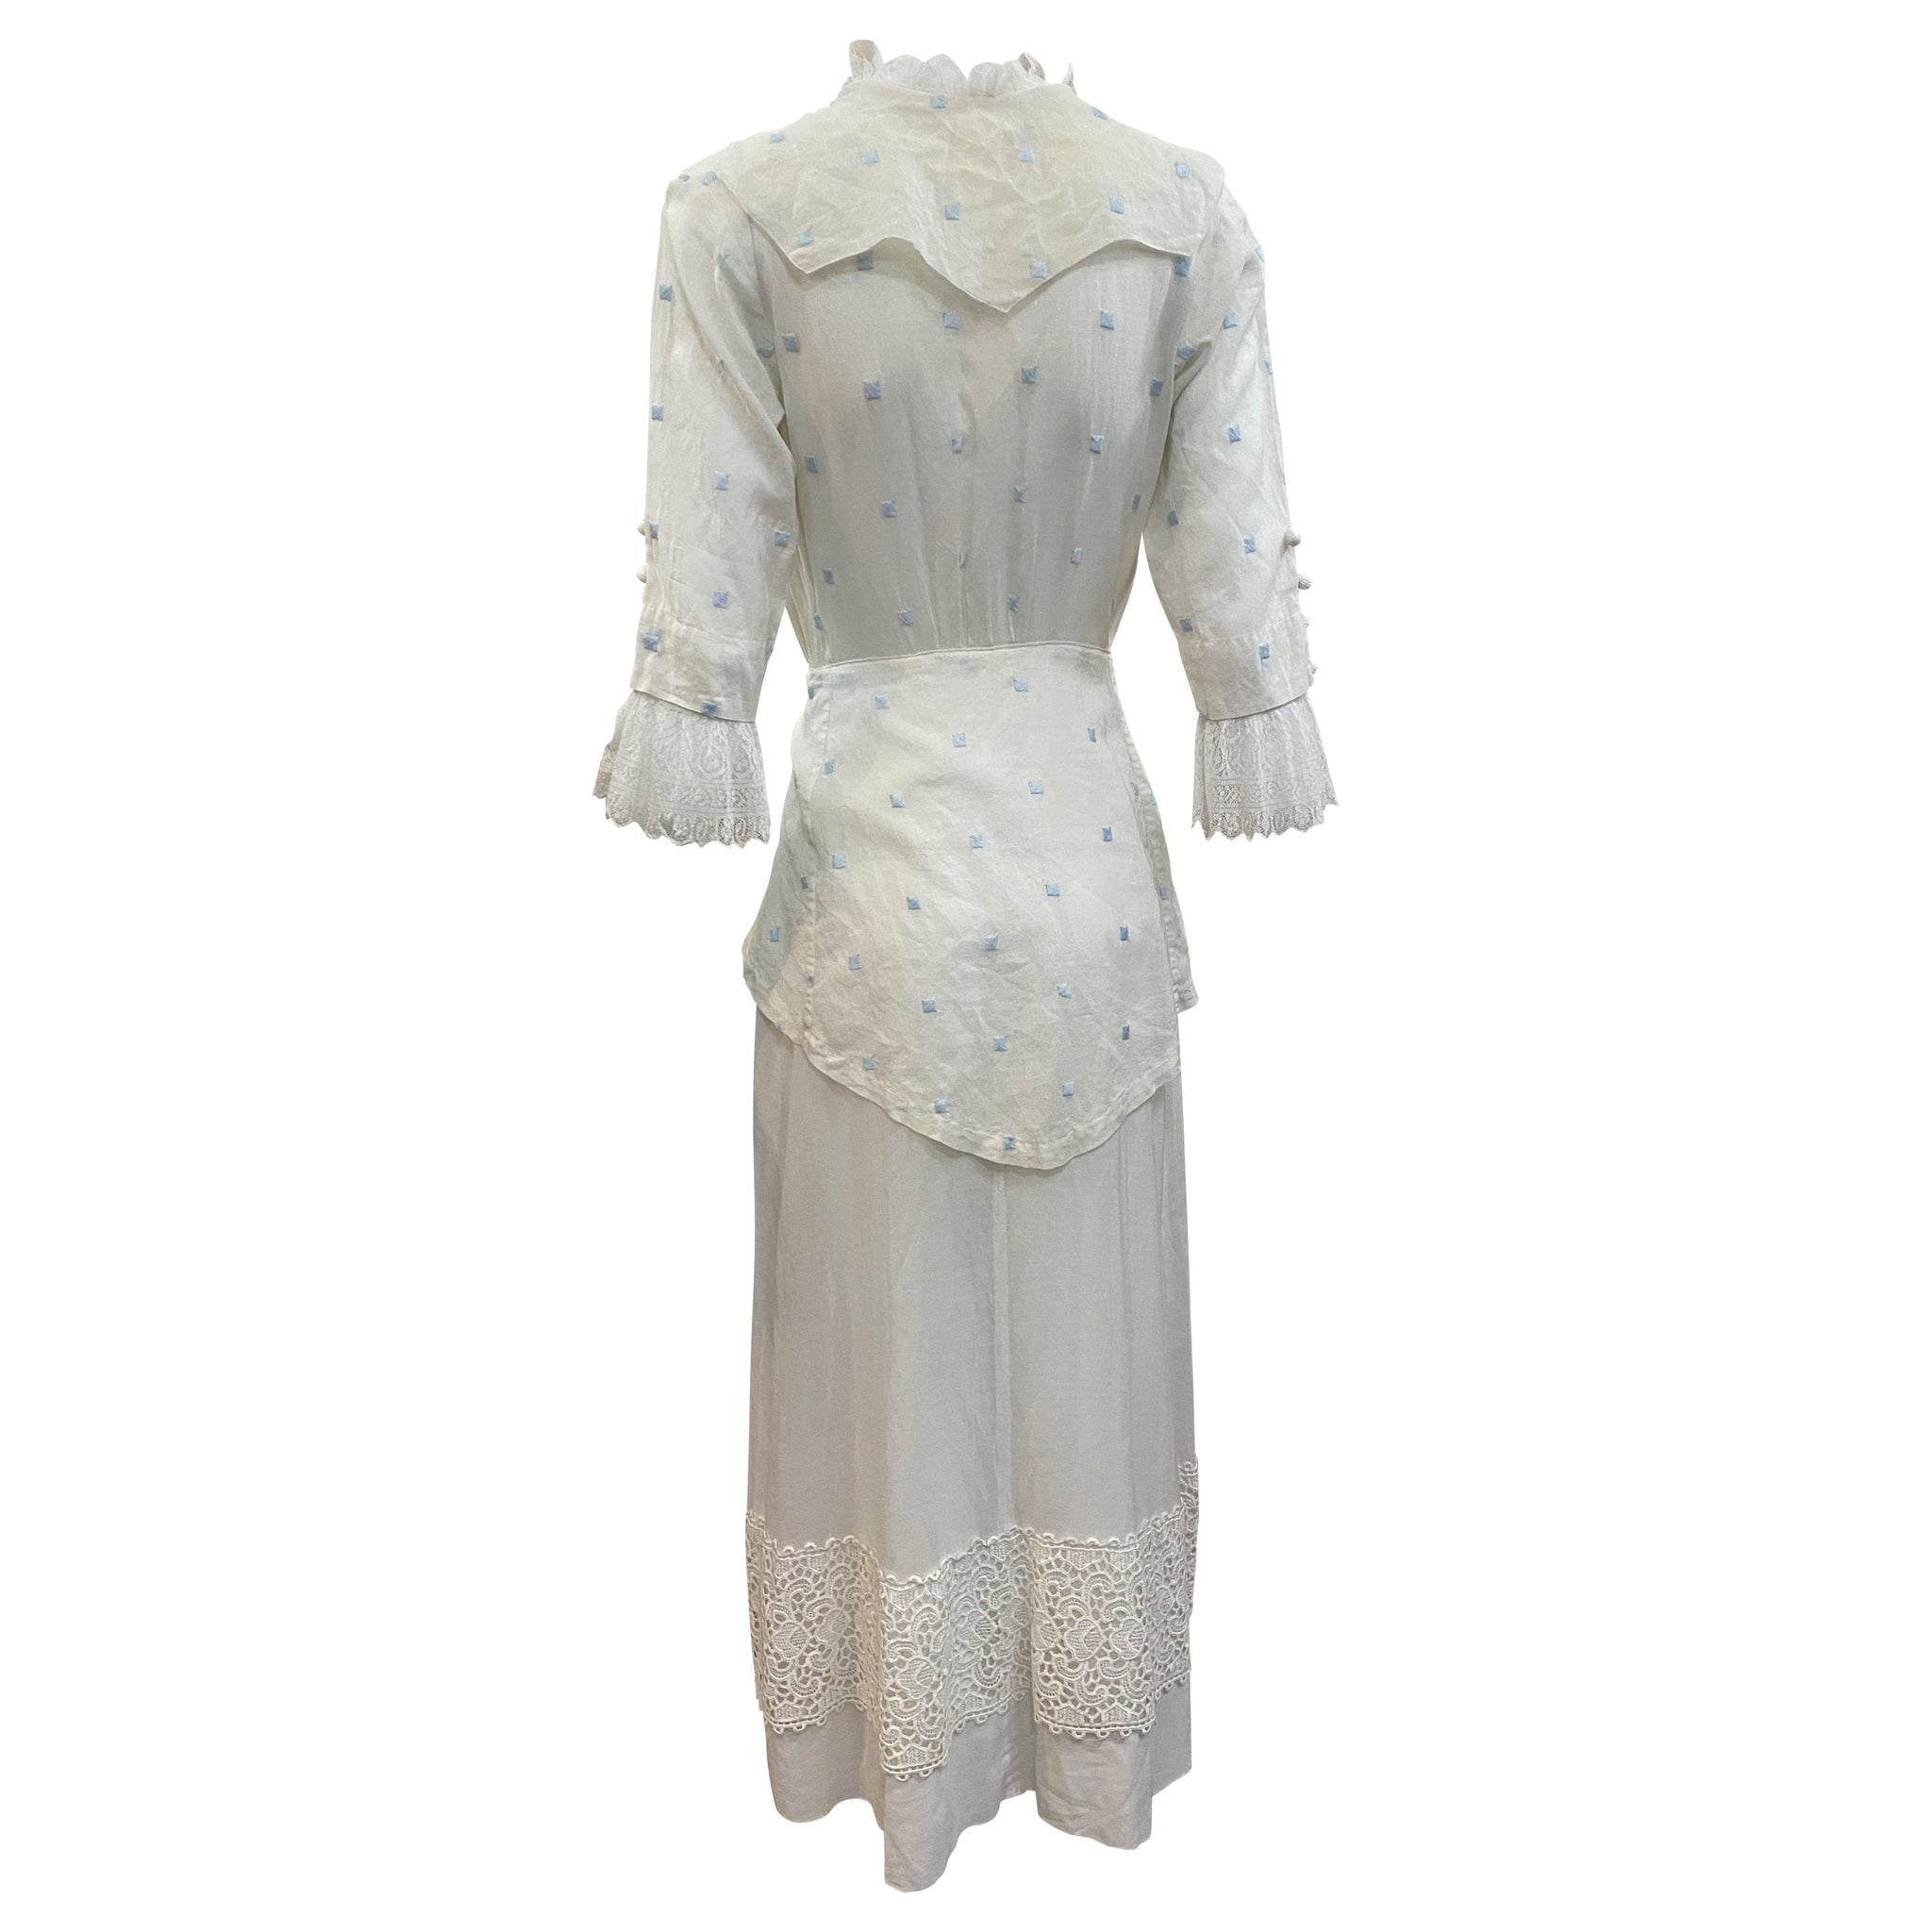 Edwardian White with Hand Embroidered Blue Polka Dot Lawn Dress, baack